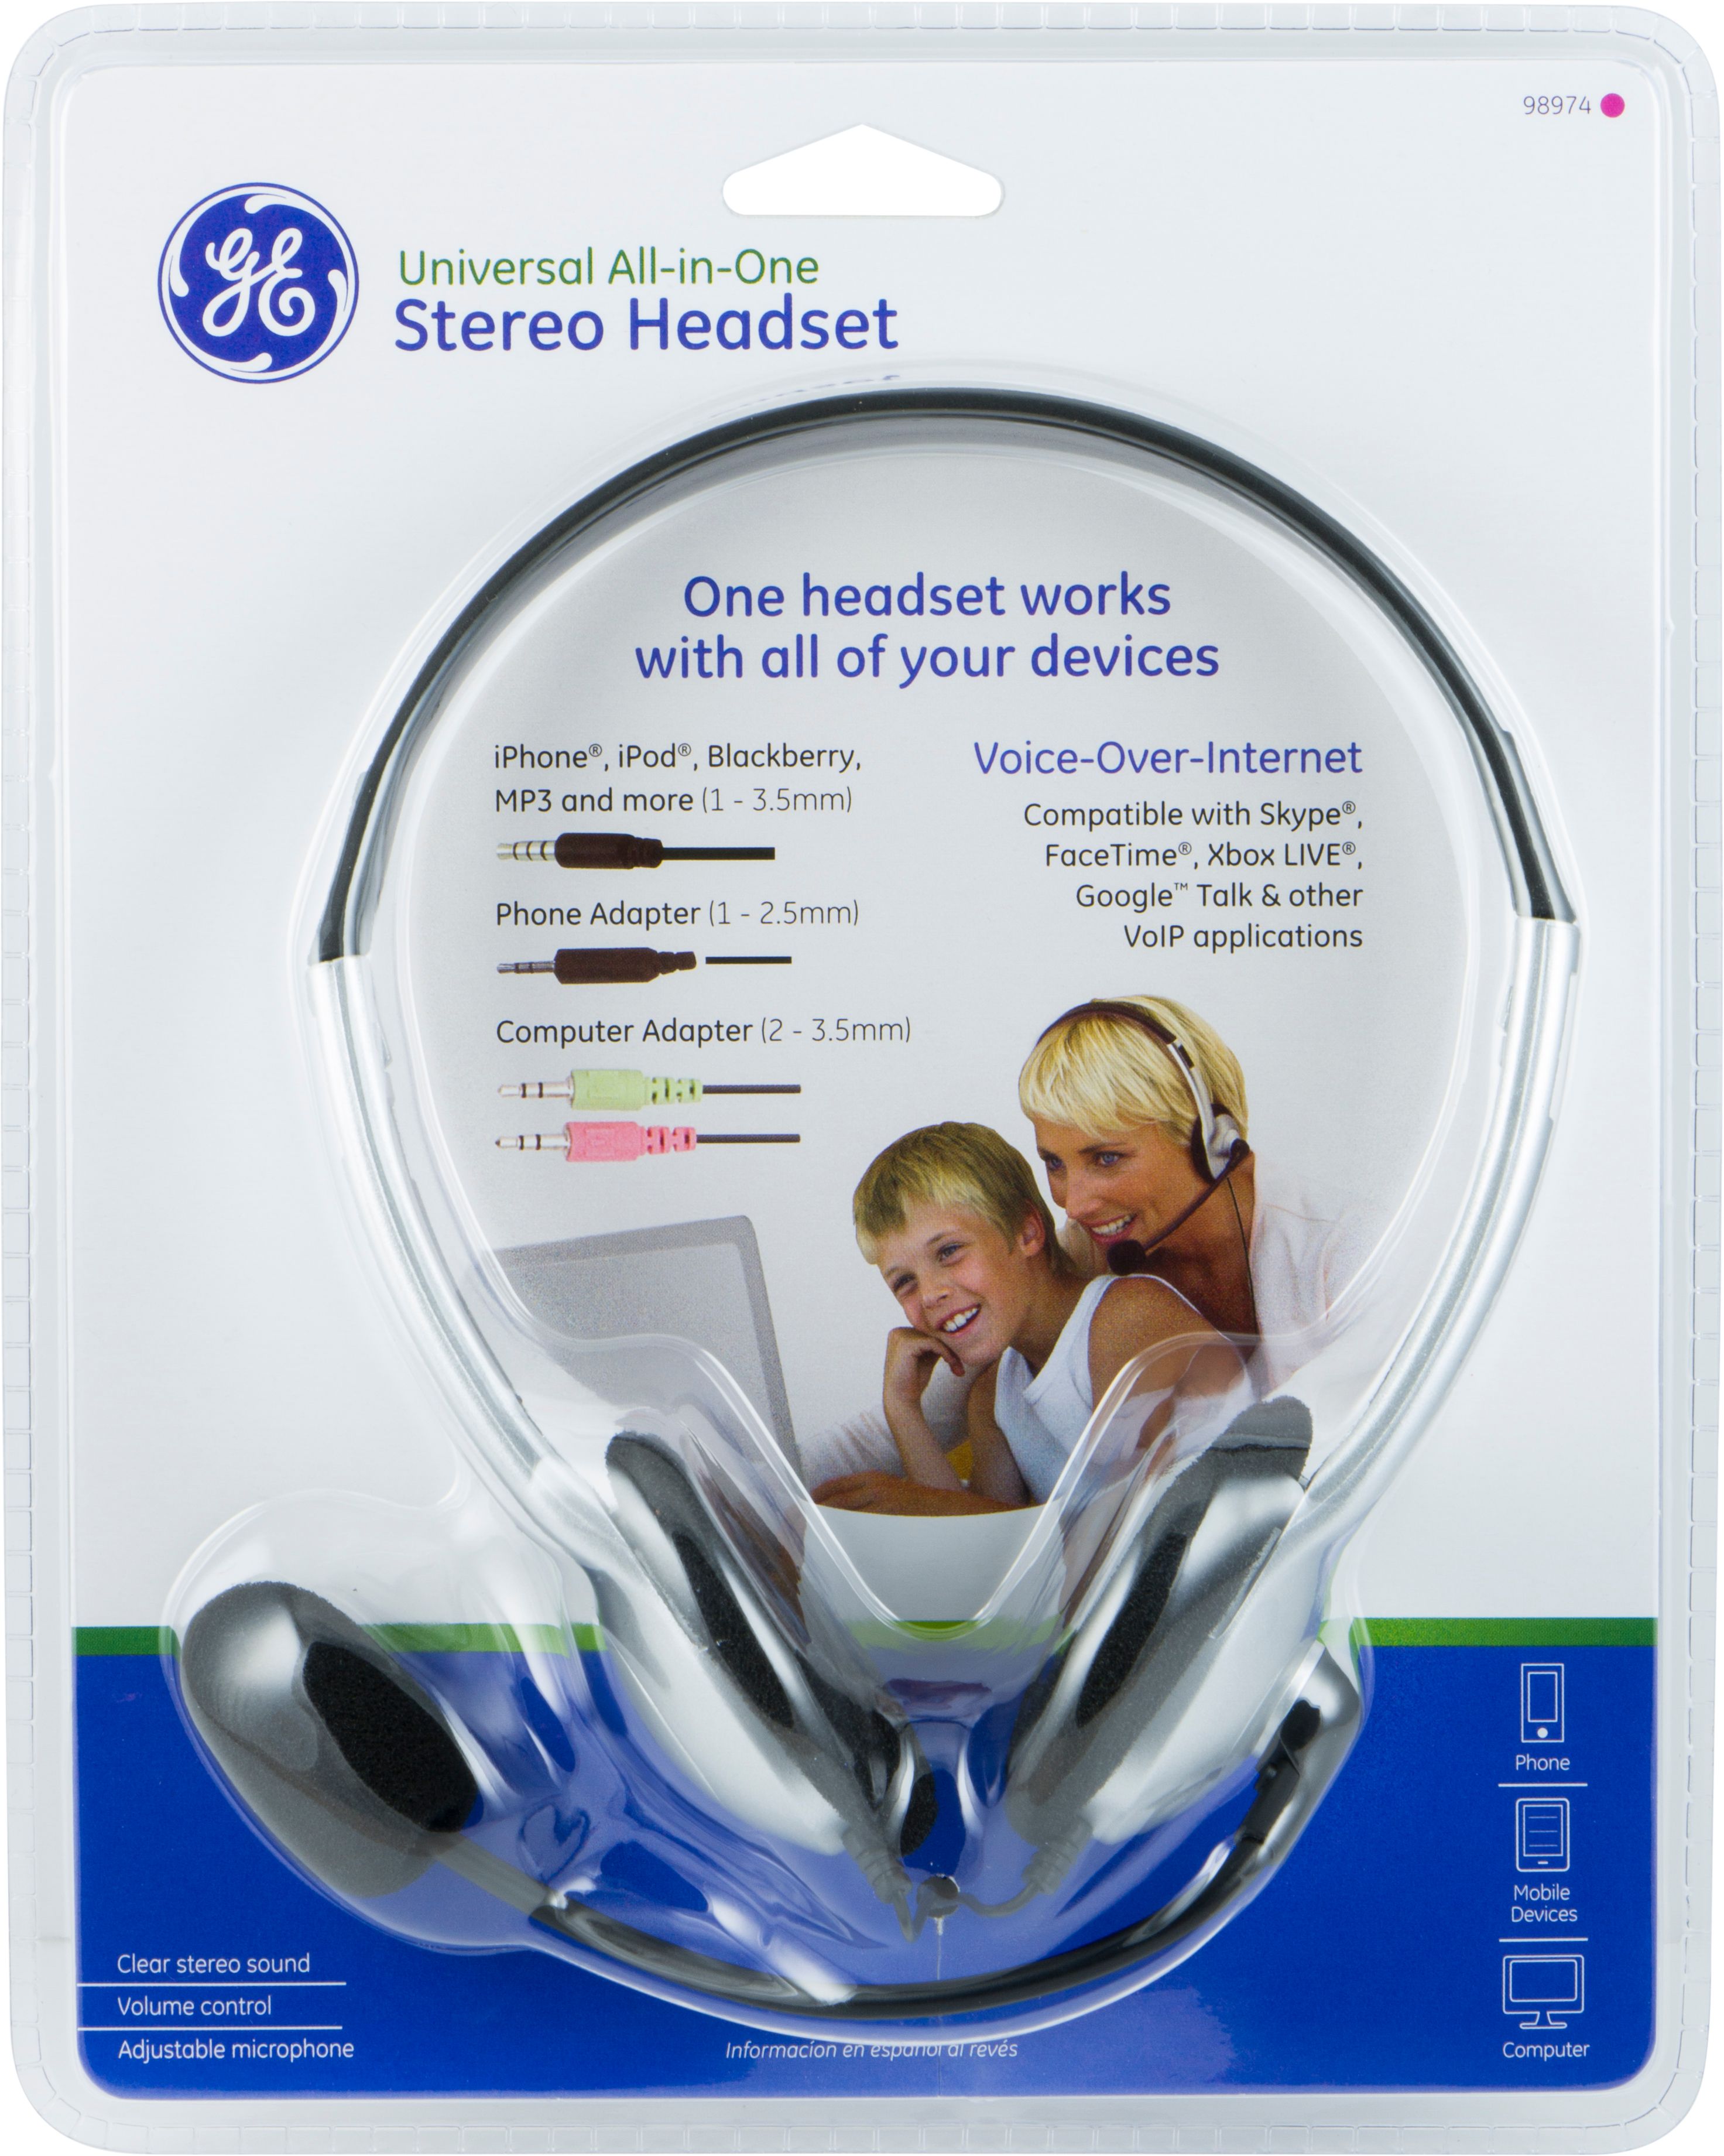 Power Gear Universal All-in-One Stereo Headset, 3.5mm and 2.5mm connector, 98974 - image 3 of 3